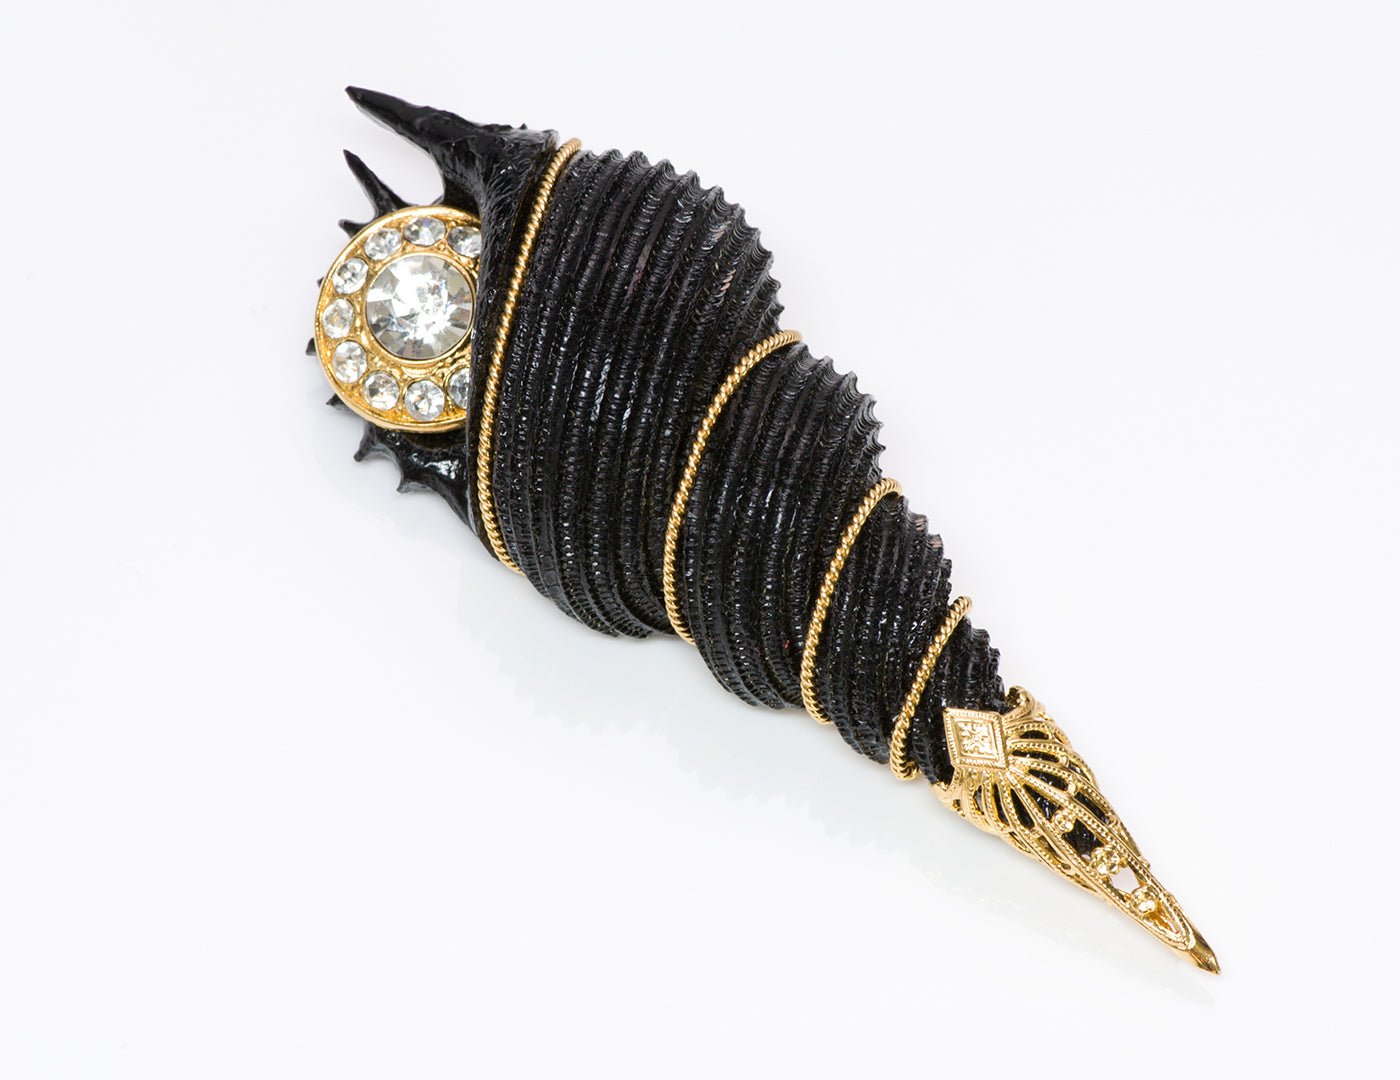 Gianfranco Ferre 1980’s Couture Black Crystal Shell Brooch